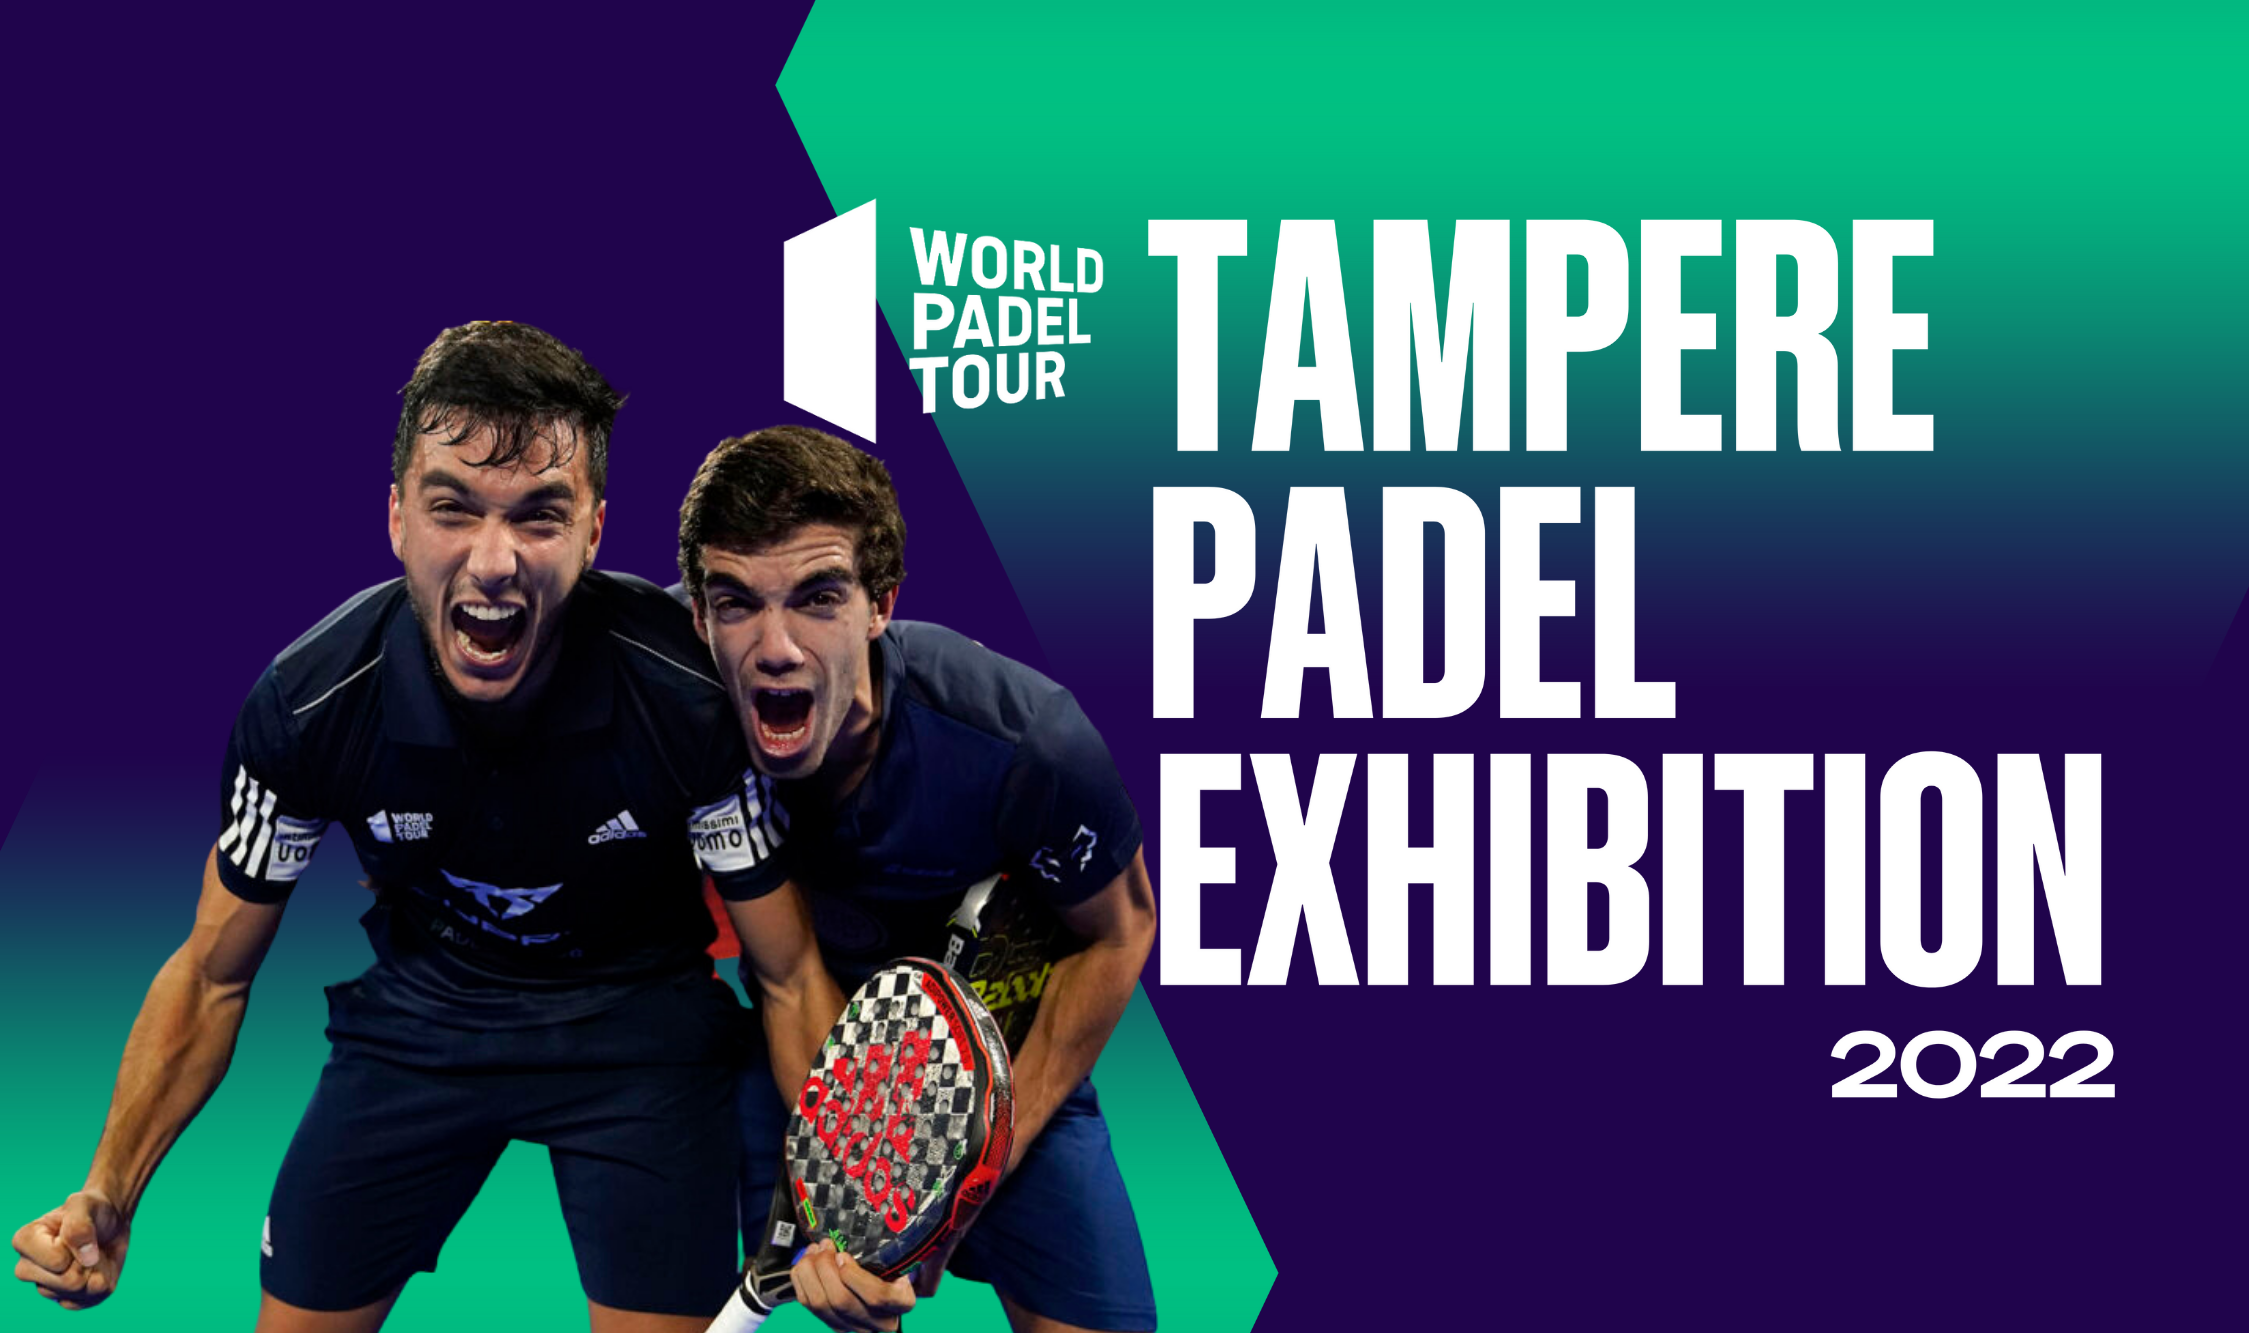 WPT - TAMPERE PADEL EXHIBITION - THURSDAY - VIP SILVER